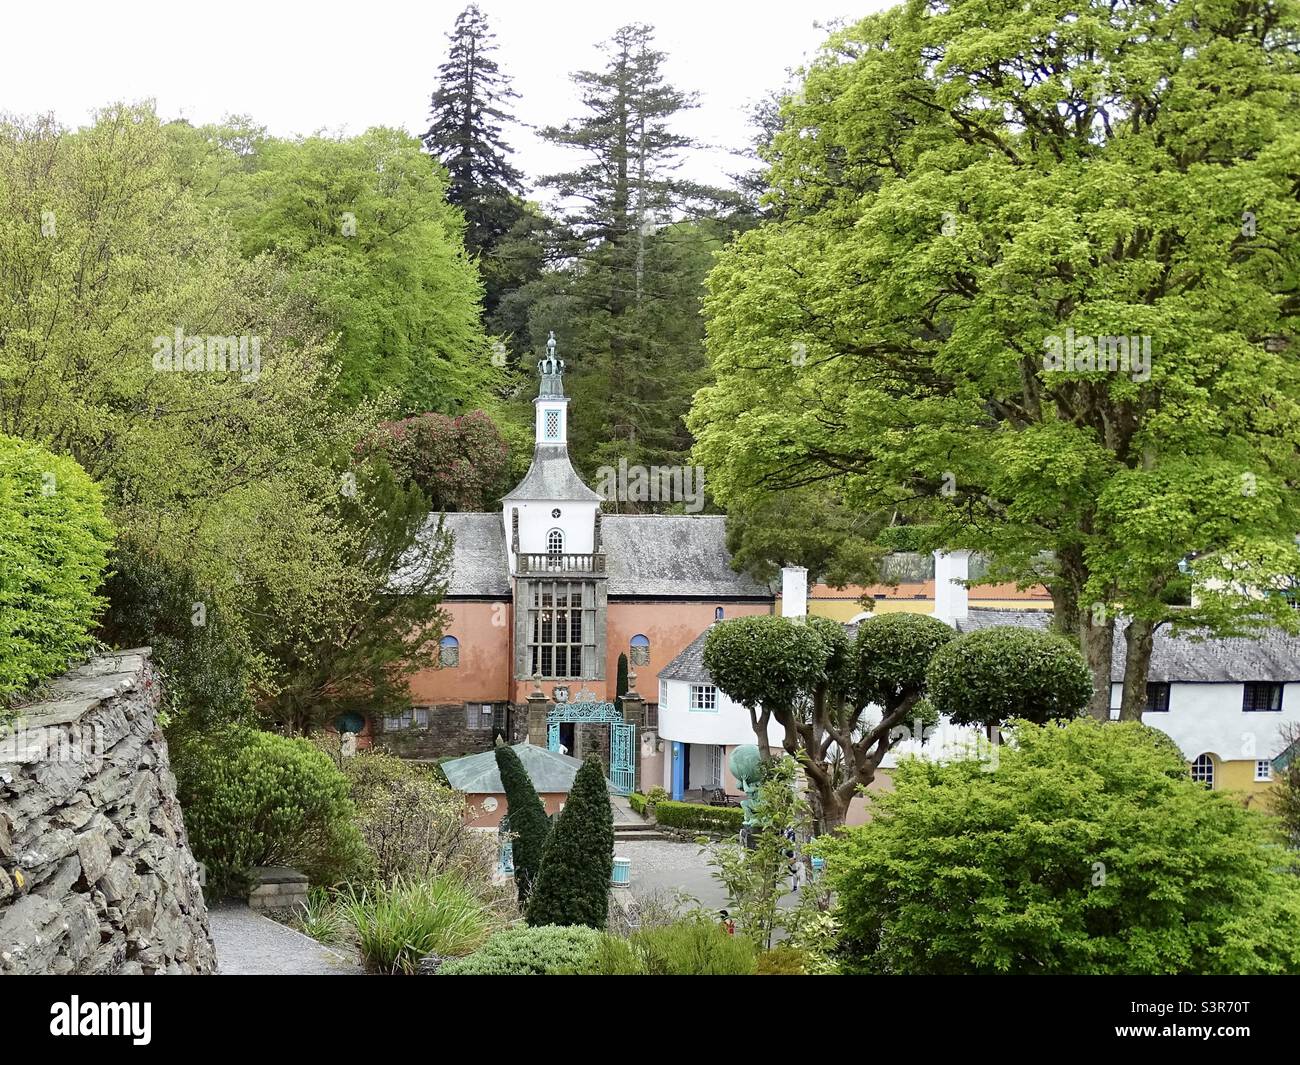 The beautiful Italian style architecture in Portmeirion in north Wales Stock Photo